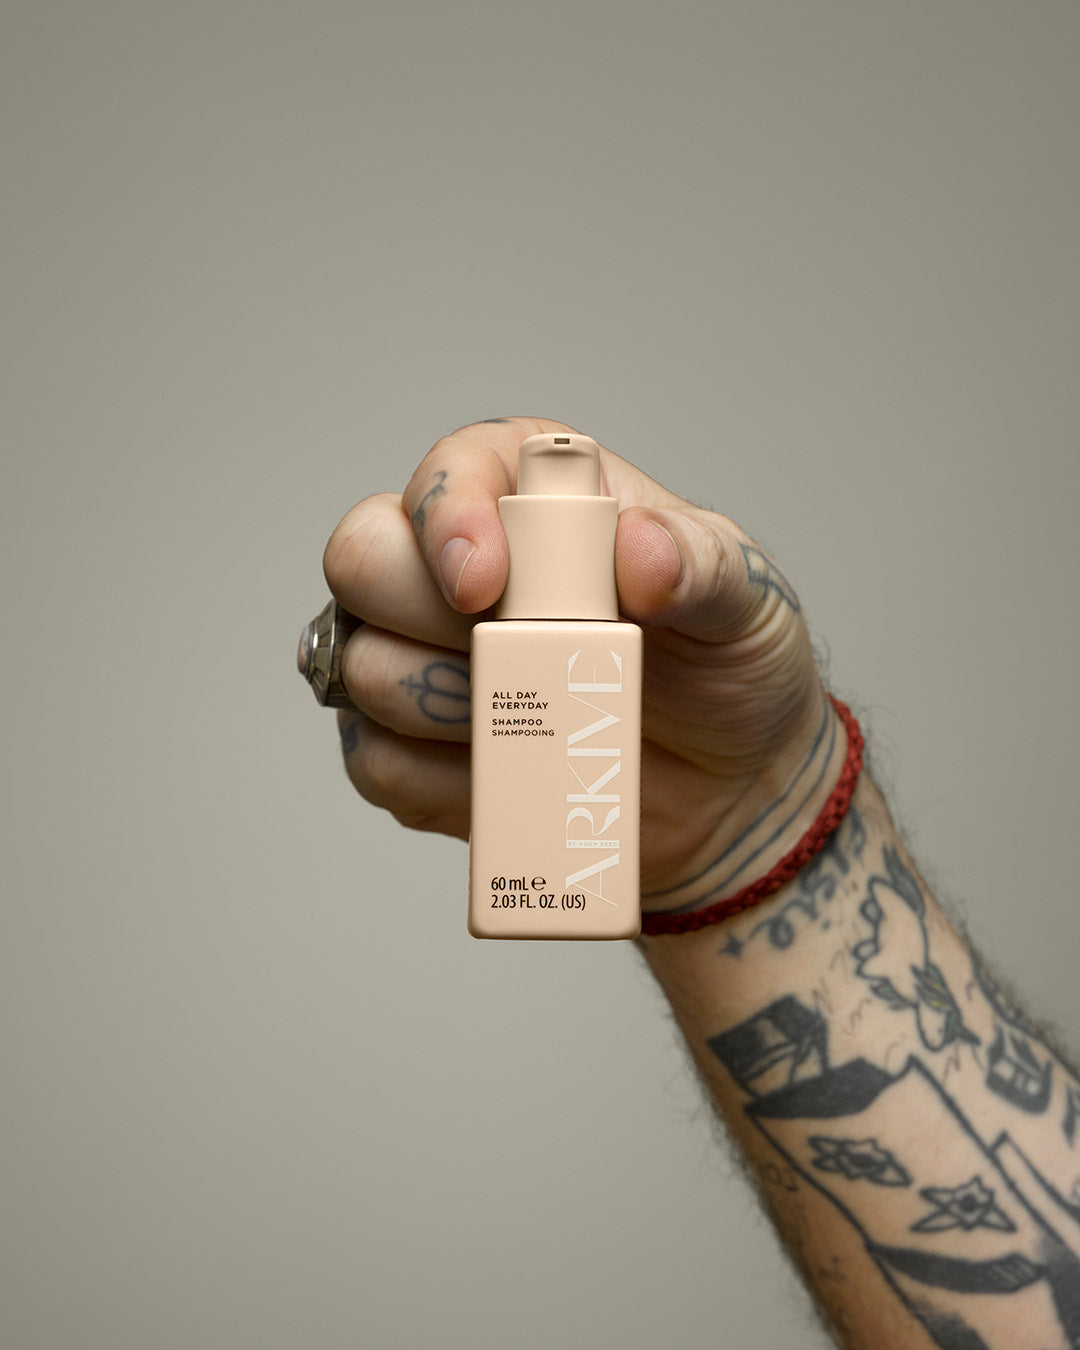 A miniature bottle of Arkive's all day everyday shampoo held against a white background